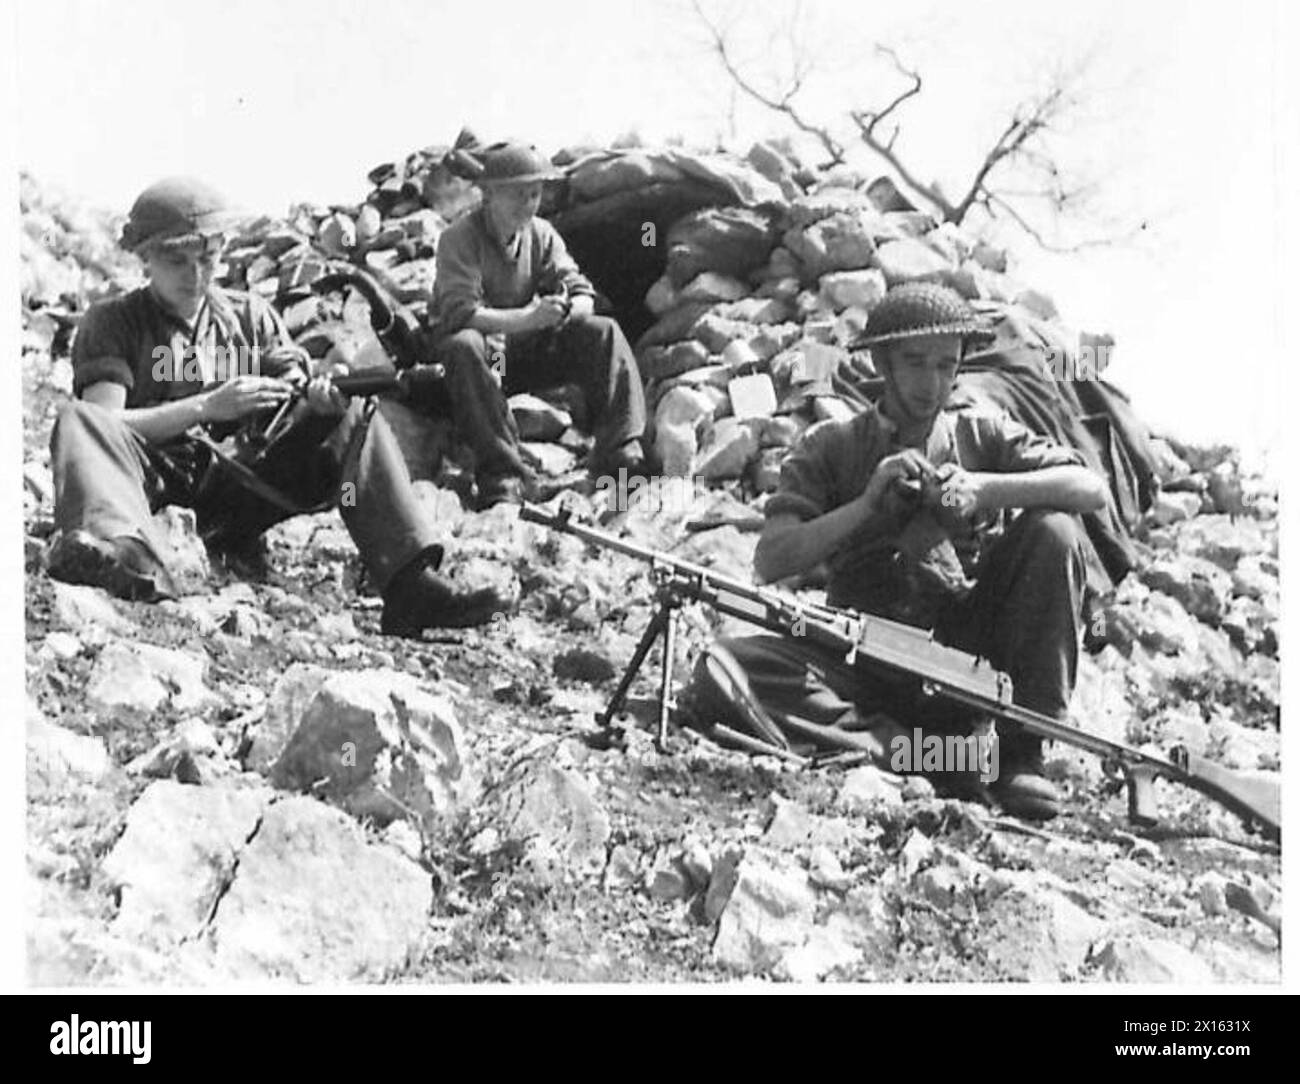 FIFTH ARMY AREA : VARIOUS - Men of 'CCompany holding positions on the ridge above the 'Bowl' come down to clean and overhaul their weapons before returning at night-time. They are:- (Right) Pte. B.A.F. Smith of 67 Beloe Crescent, King's Lynn, Norfolk (Left) Pte. W. Peacock, of Diss Road, Banham, Norfolk (Centre background) Pte. G.J. Moore, of 'Homestead' West Bradenham, Thetford, Norfolk British Army Stock Photo